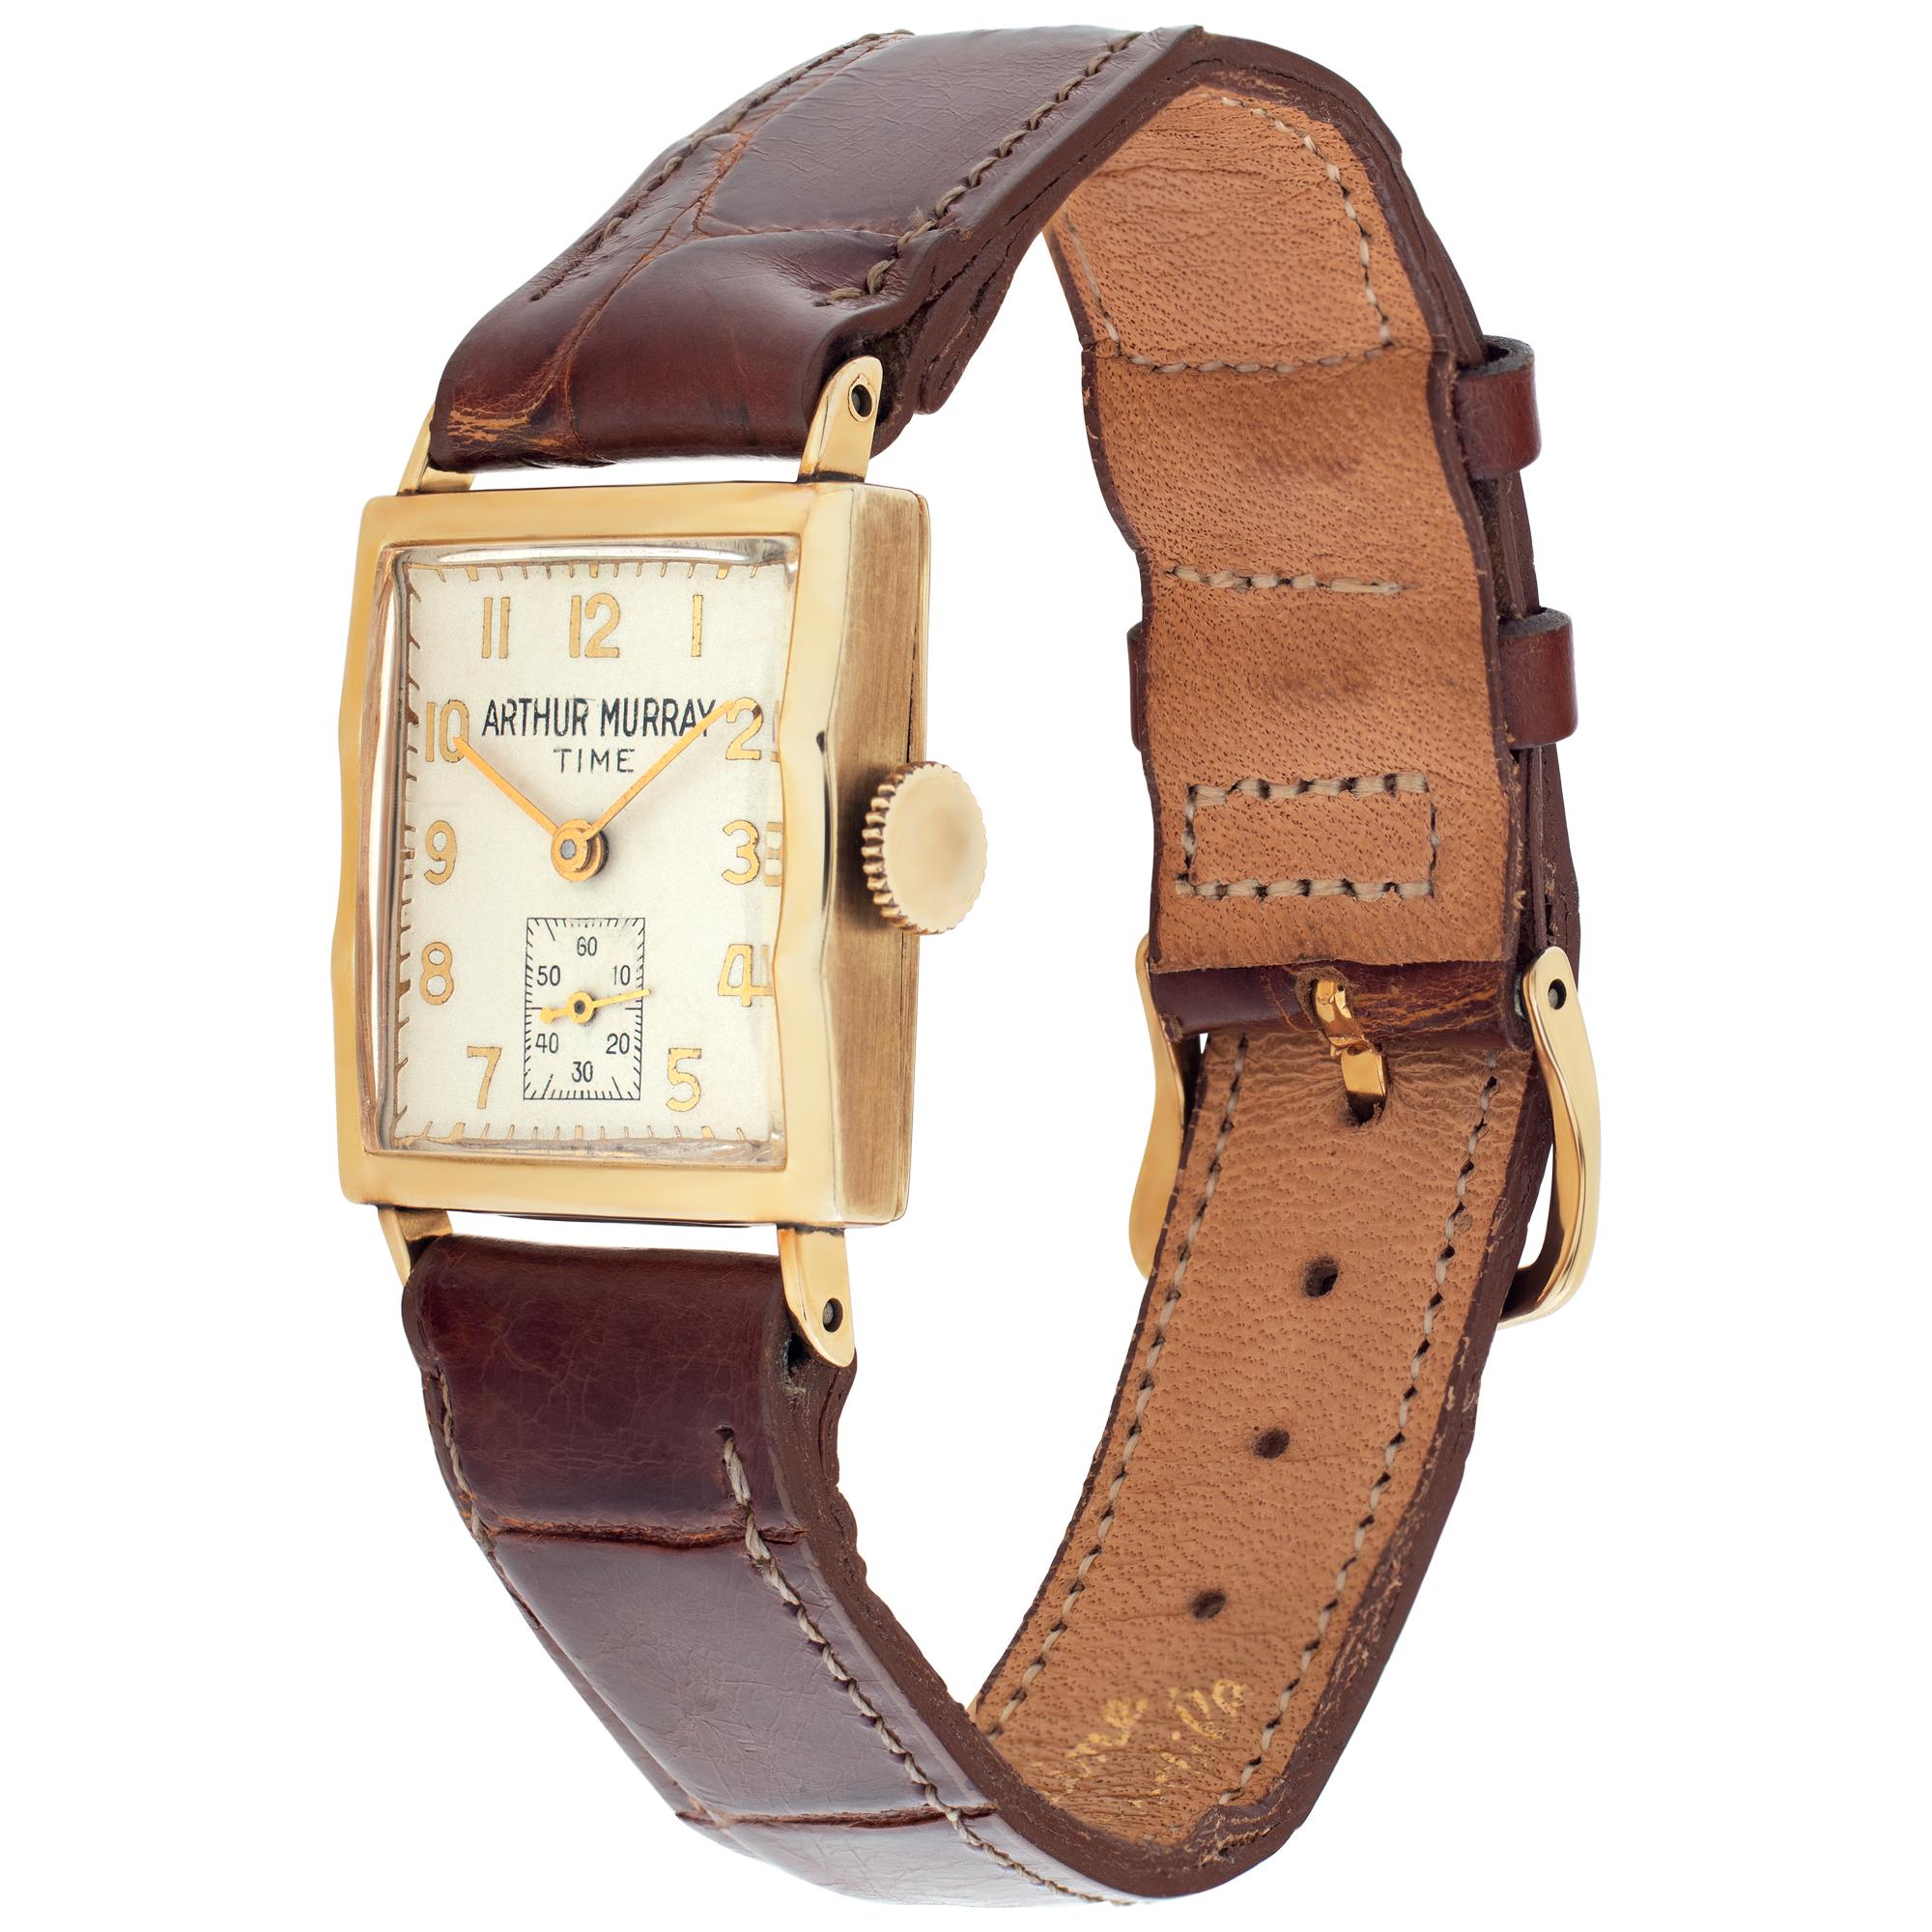 Unisex A. Murray 14k case, 14k bezel, leather leather band with two piece clasp to honor the famous ballroom dancer and buisnessman. Manual wind with Sub-Seconds. Certified pre-owned. Fine Pre-owned A. Murray Watch. Certified preowned Vintage A.